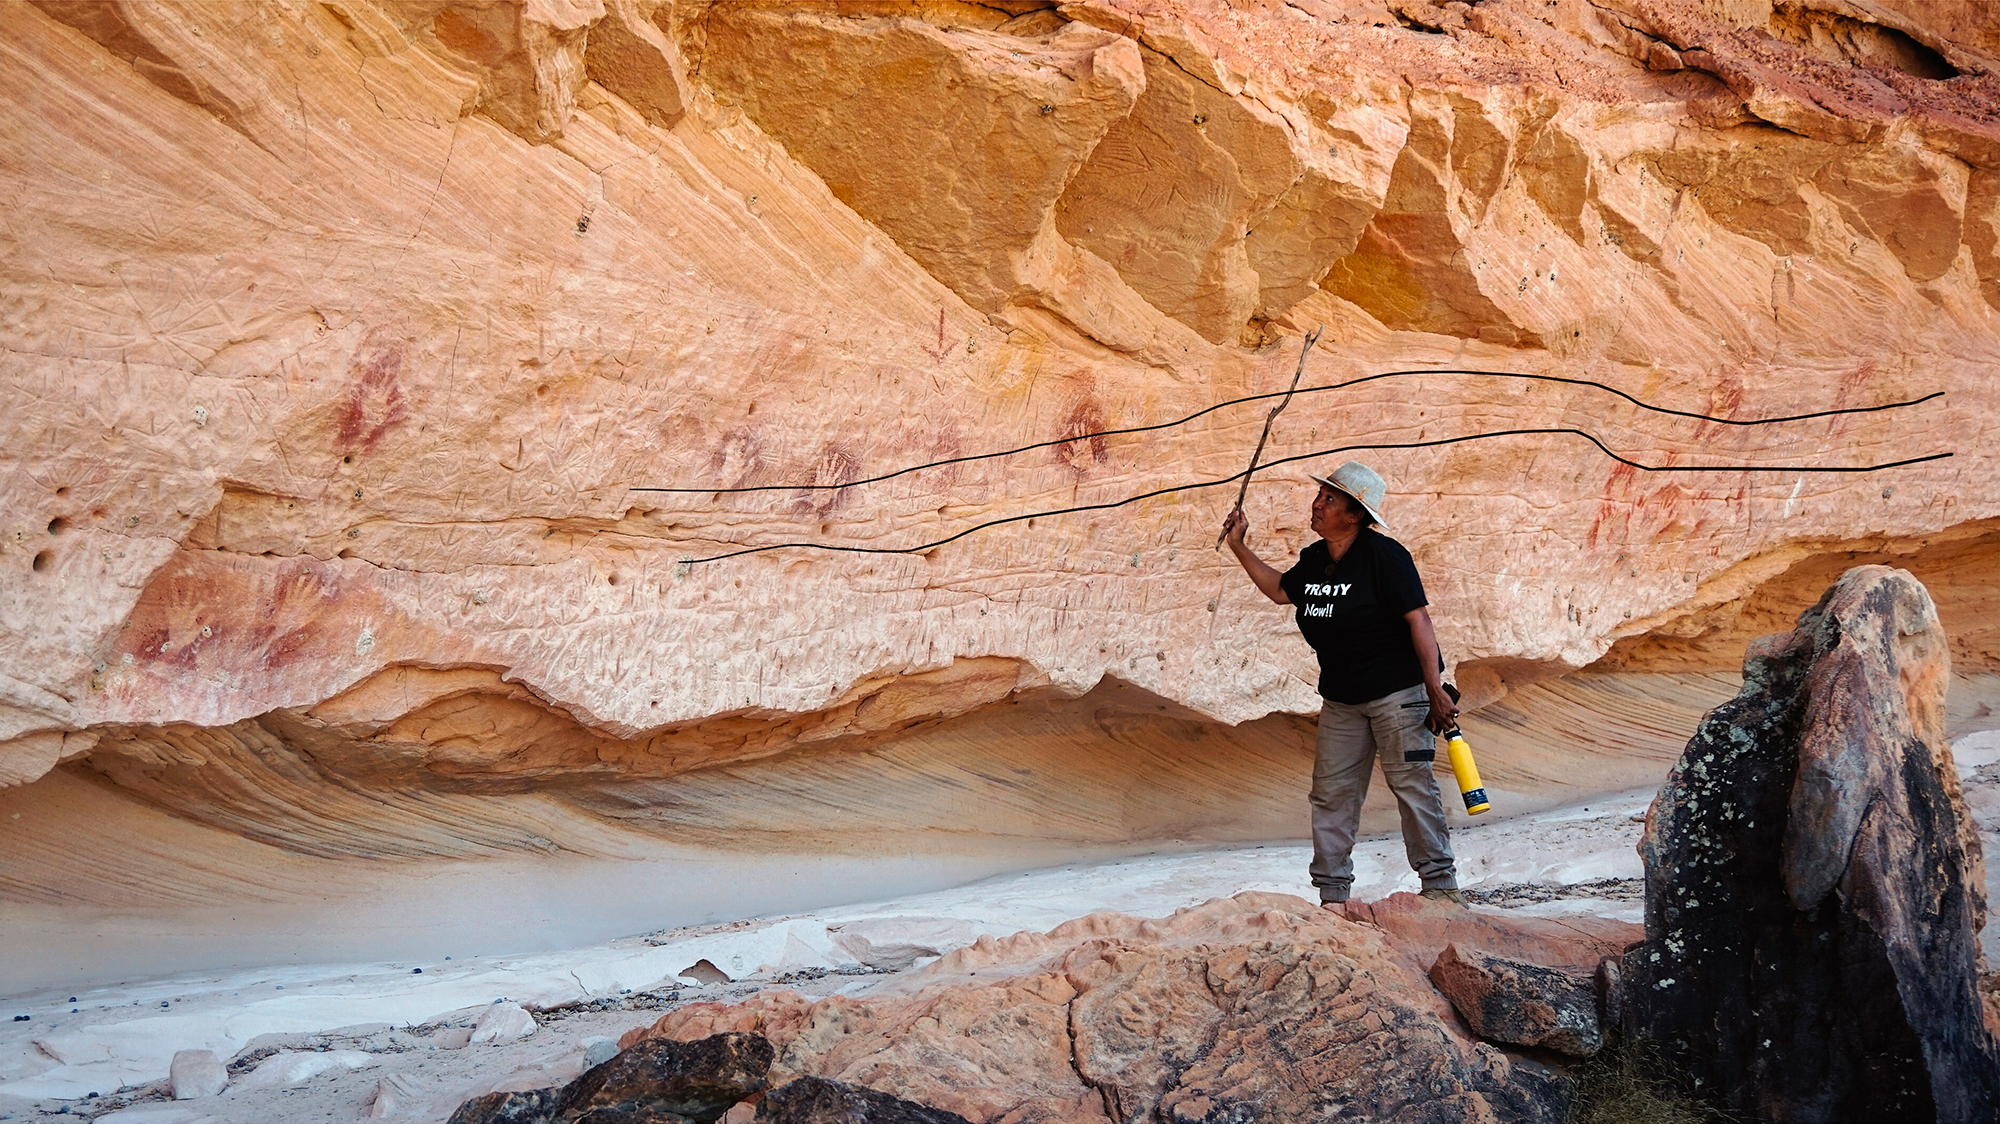 Suzanne Thompson in front of the engraved snake-like design, interpreted as a ‘Rainbow Serpent’ depiction (with black line showing its position). Thompson is explaining the significance of the rock art